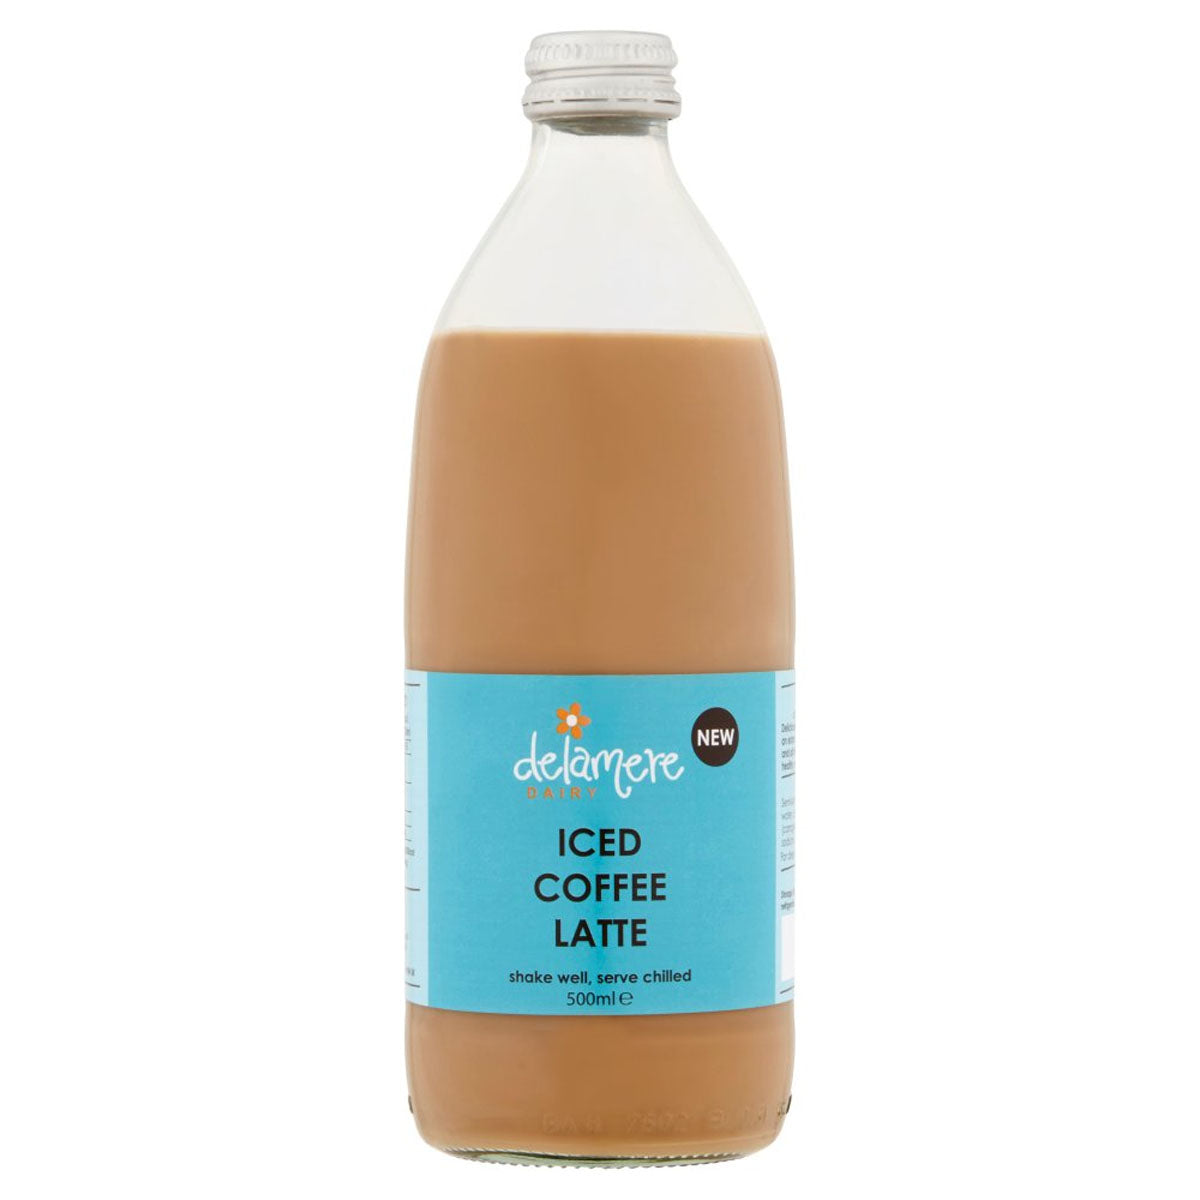 Delamere - Dairy Iced Coffee Latte - 500ml - Continental Food Store